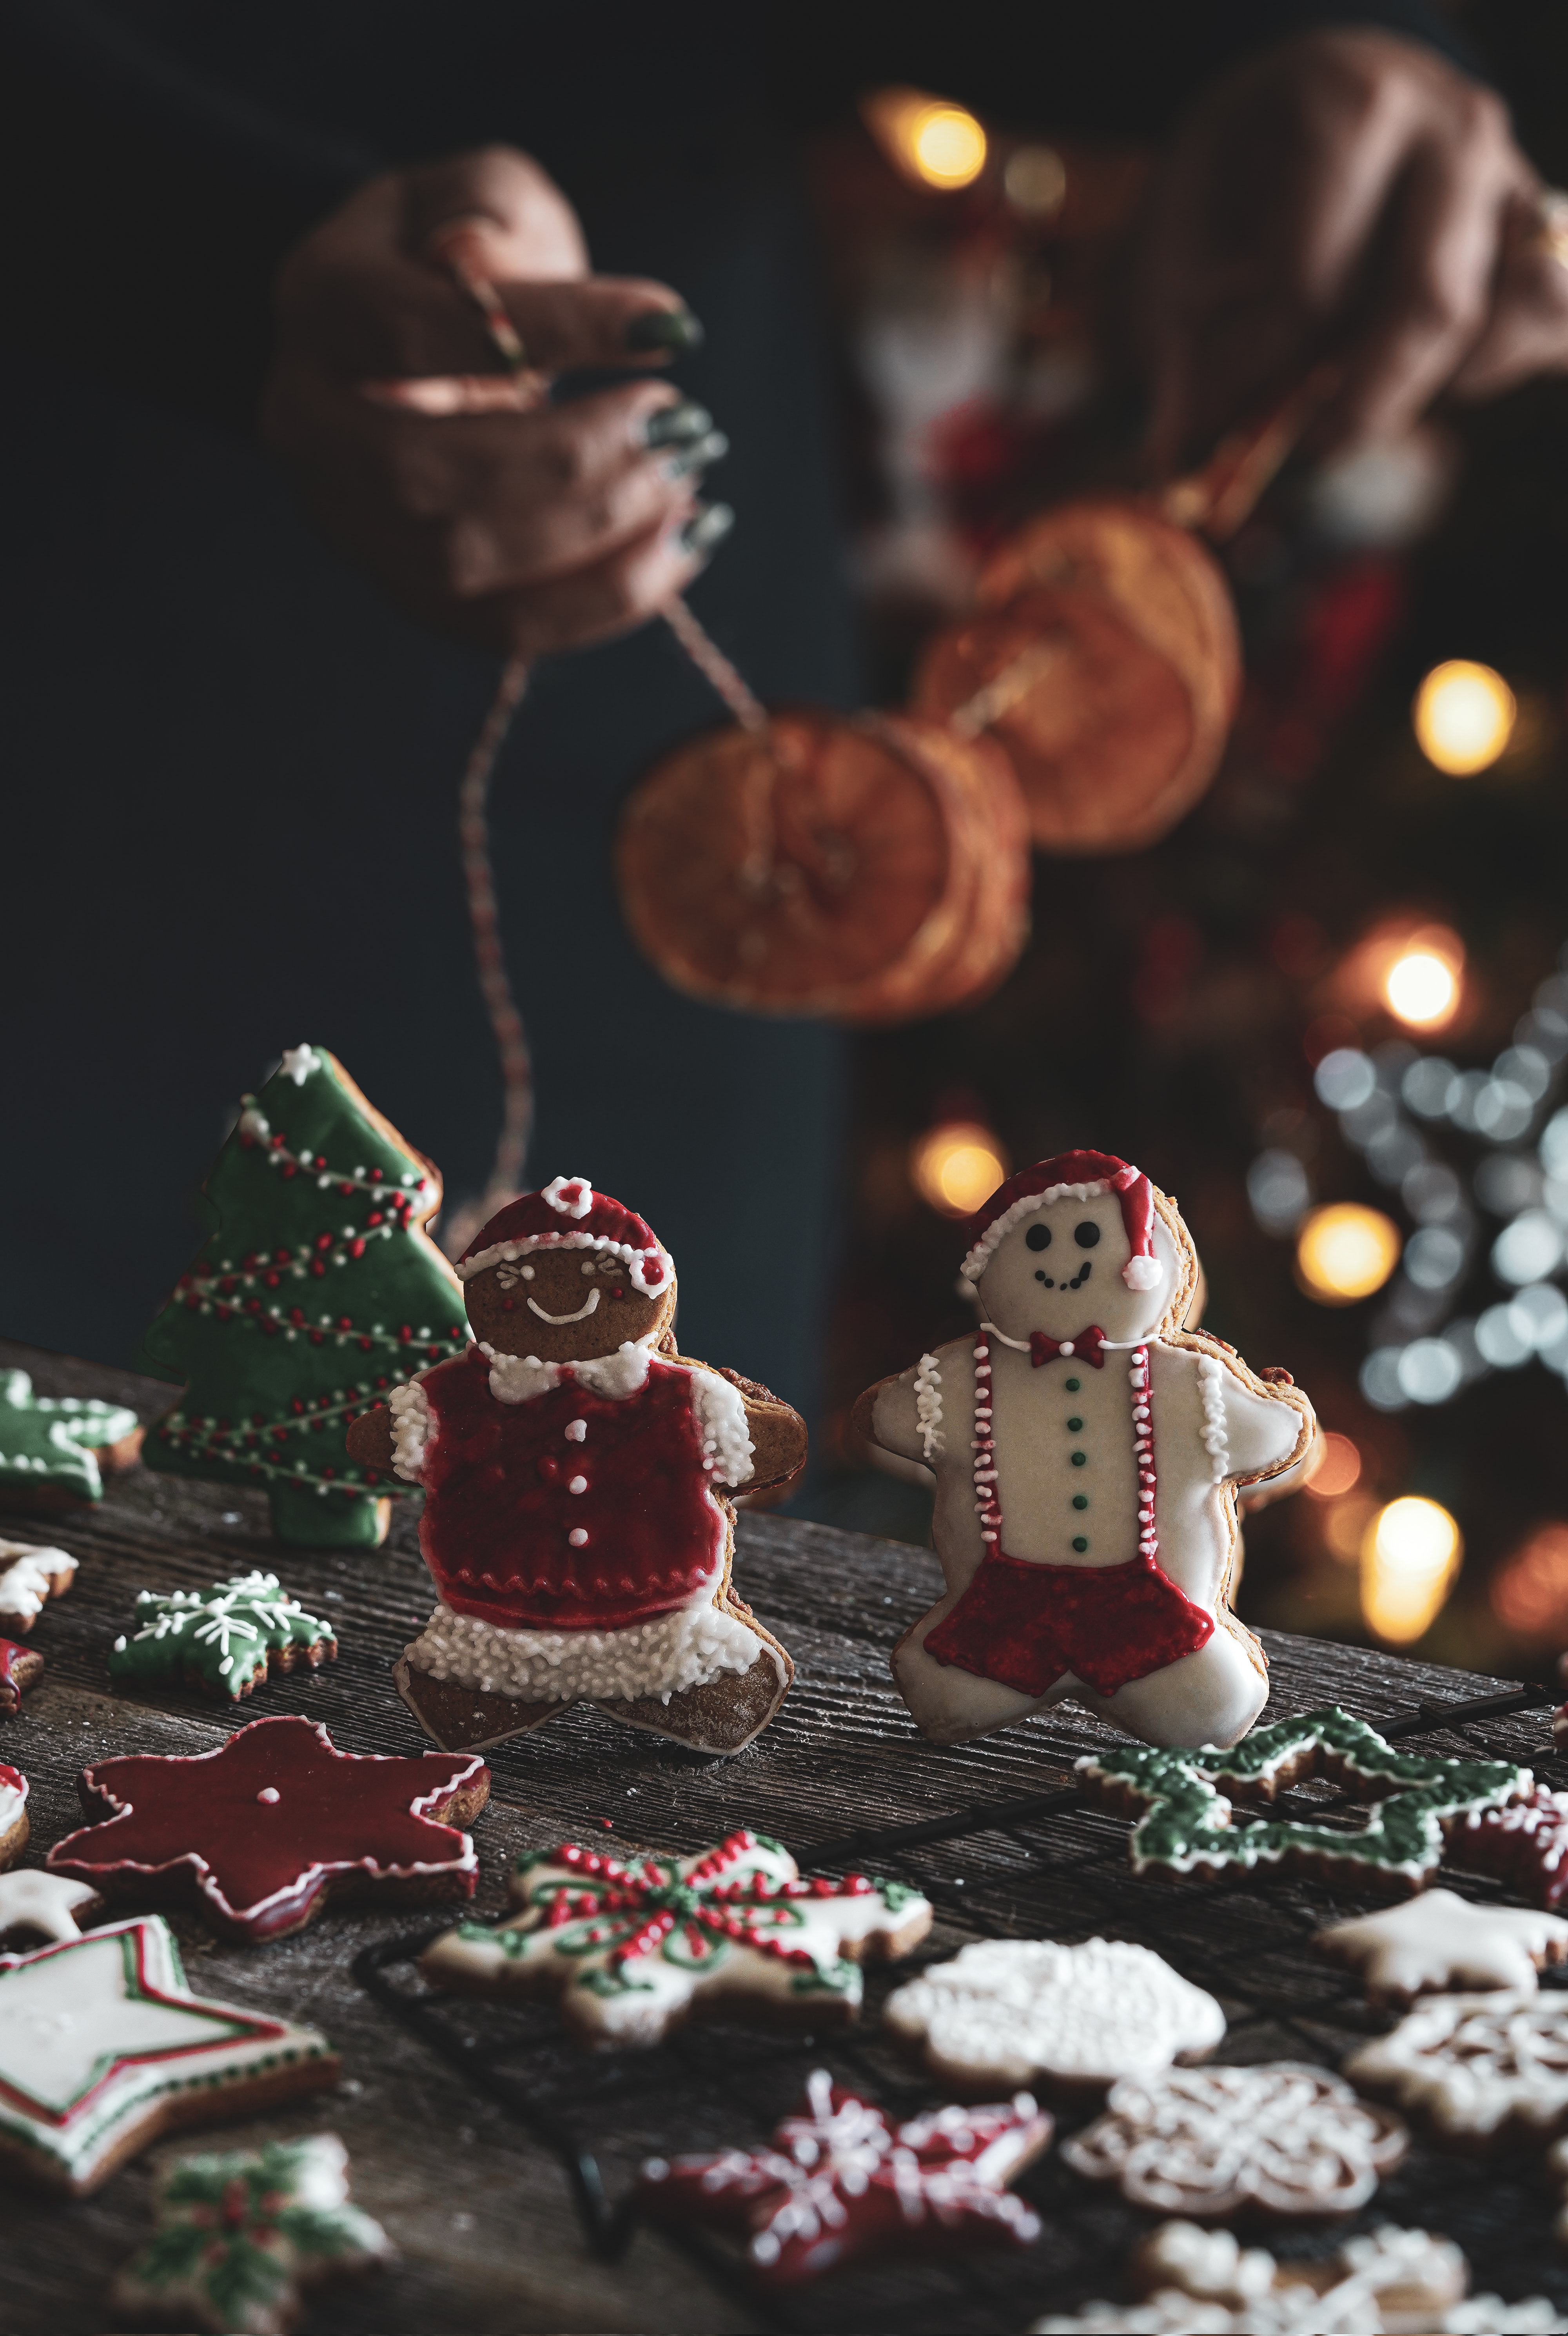 138436 download wallpaper new year, holidays, cookies, christmas, holiday, figurines, figures, gingerbread screensavers and pictures for free